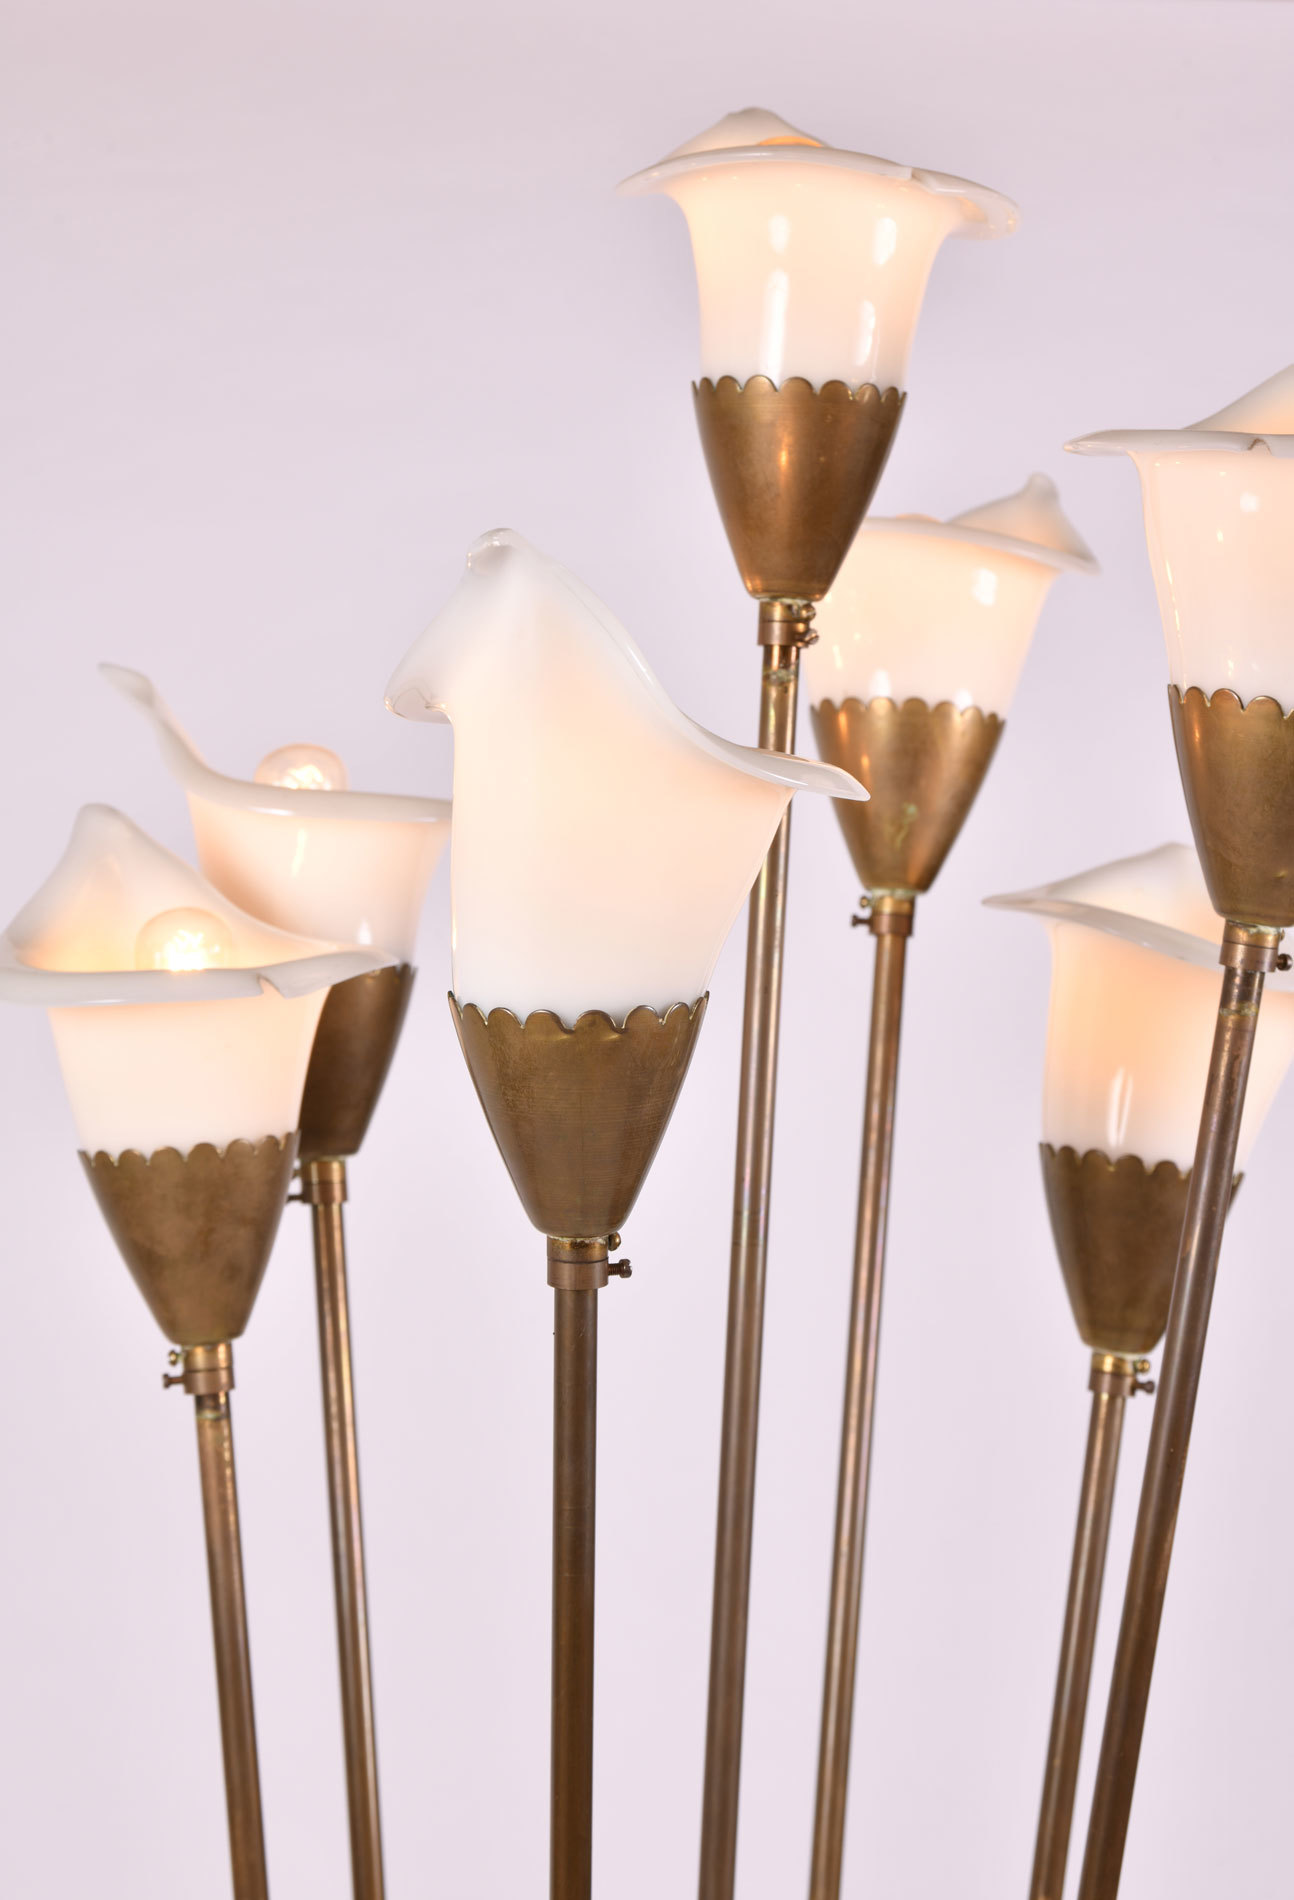 The image for Lillies Standard Lamp 03